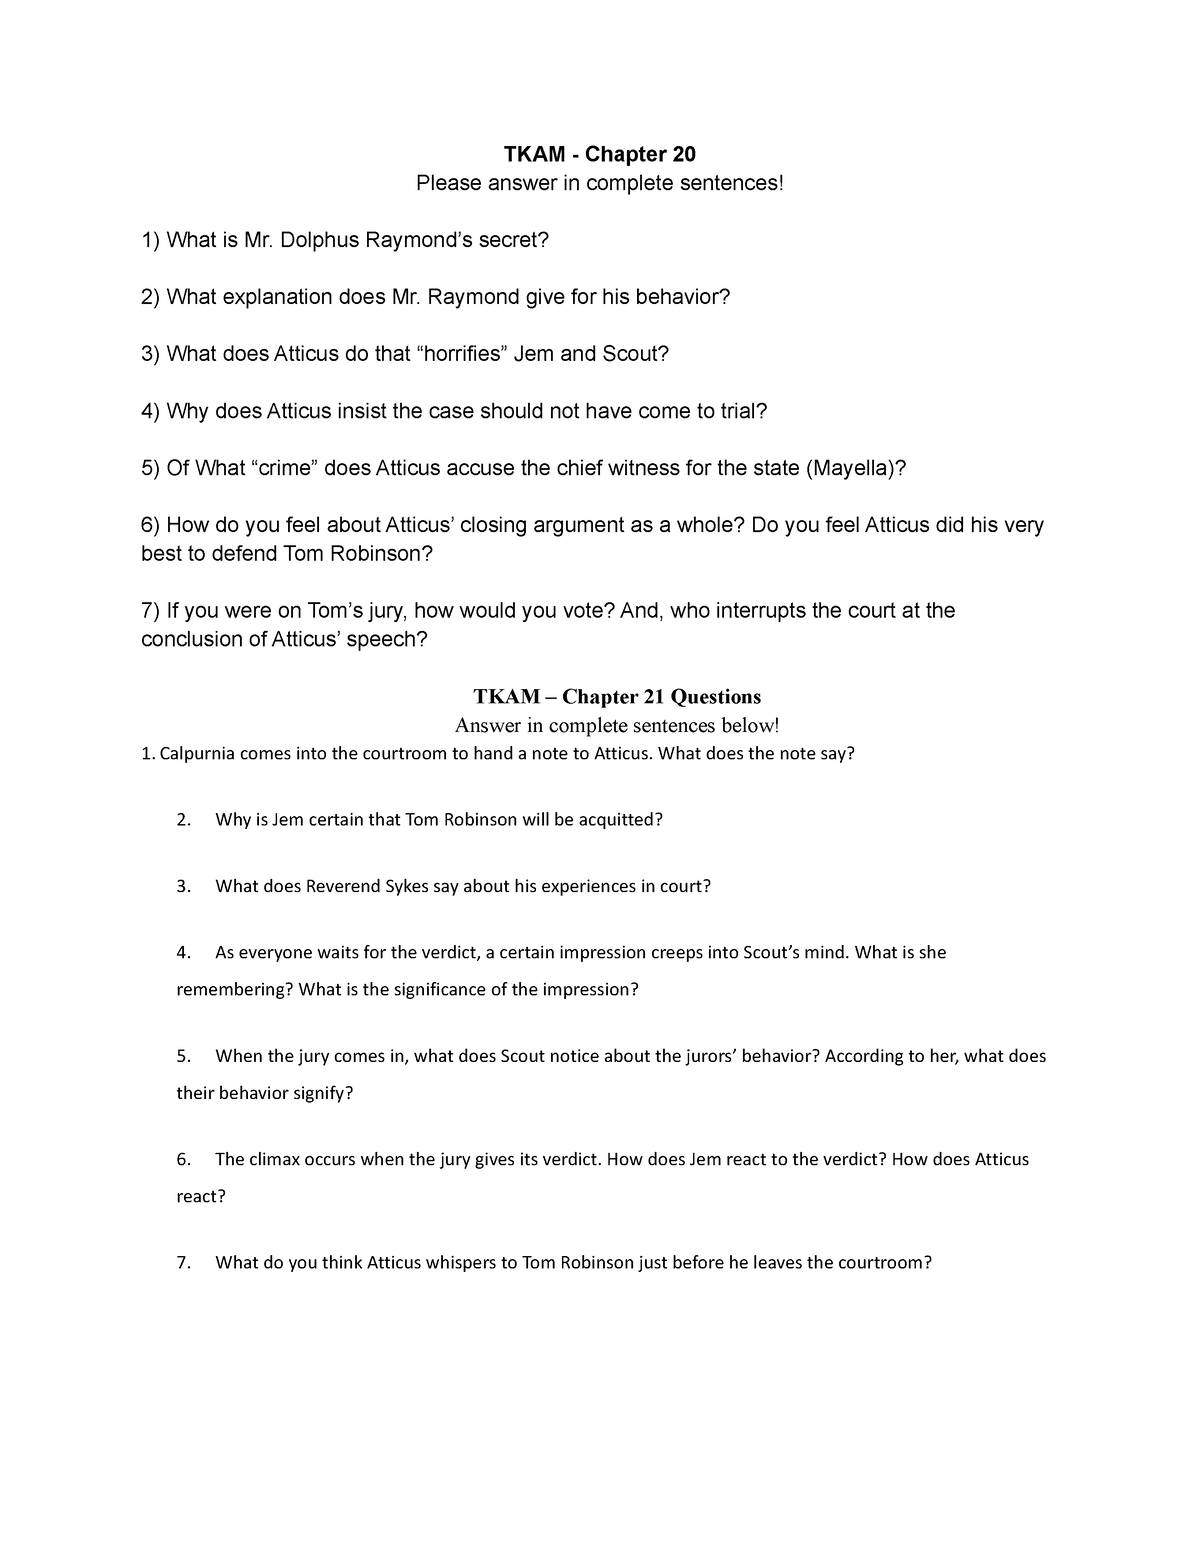 essay questions for tkam